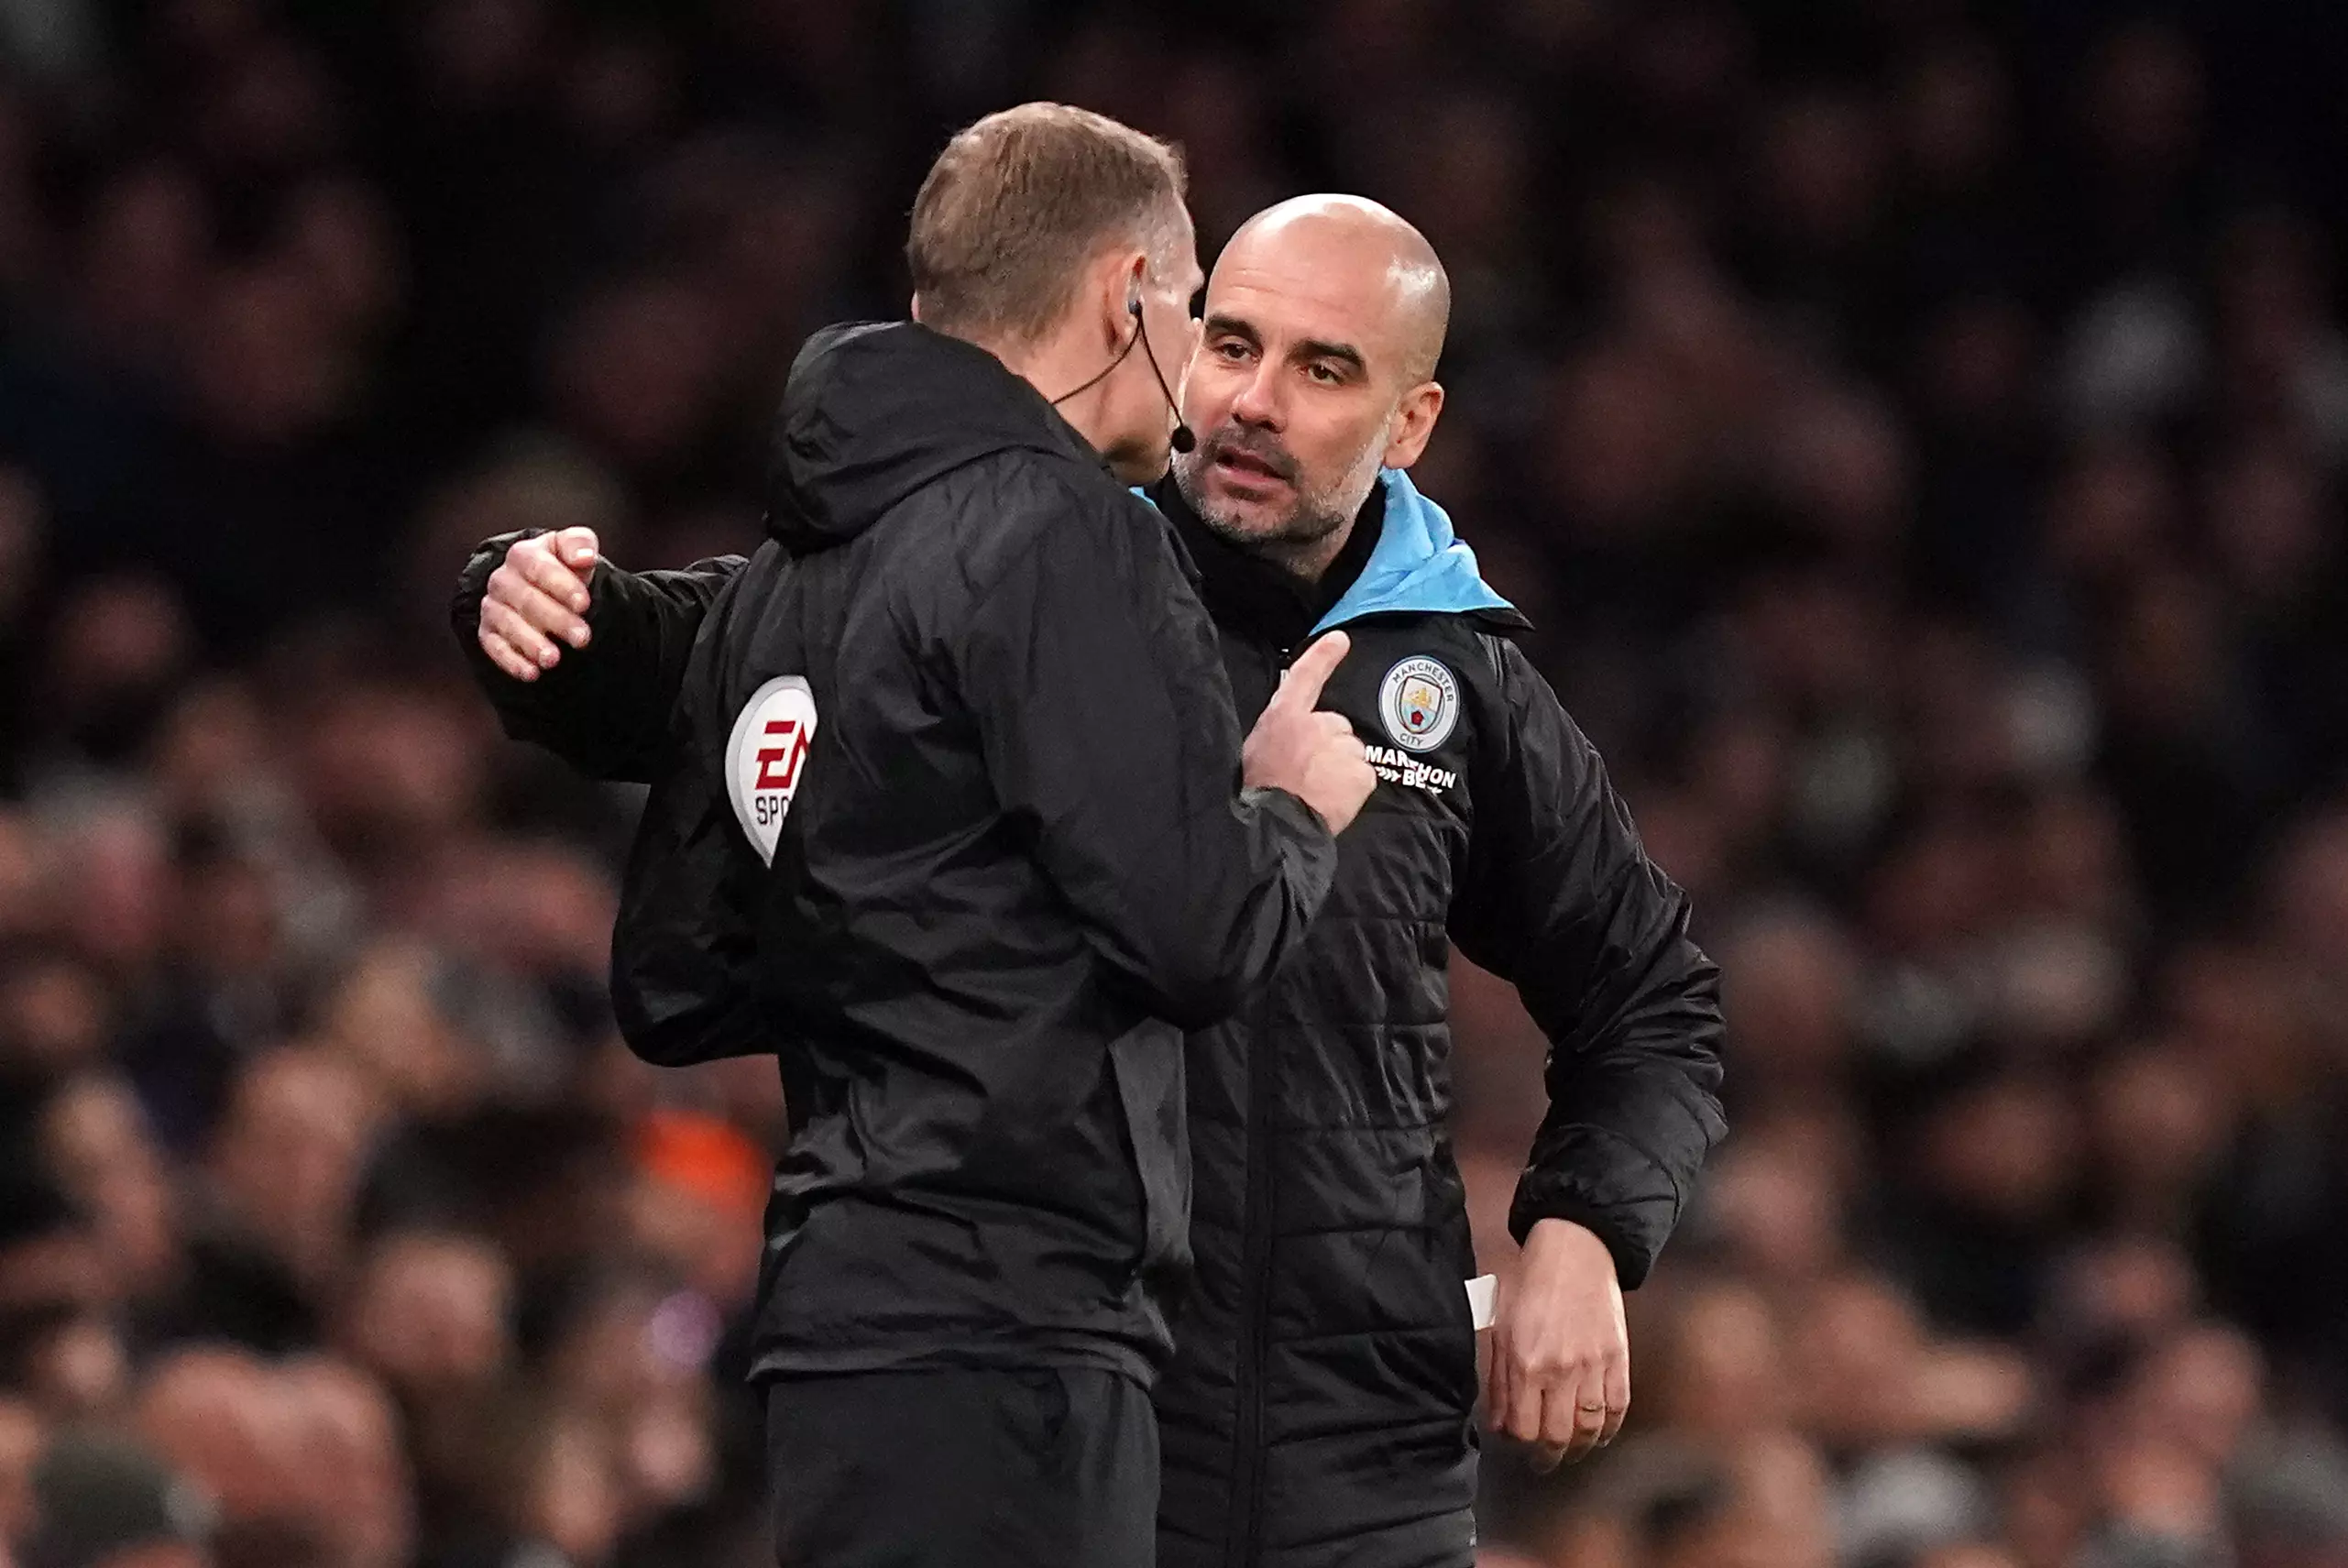 Guardiola discusses a referee decision with the fourth official. Image: PA Images